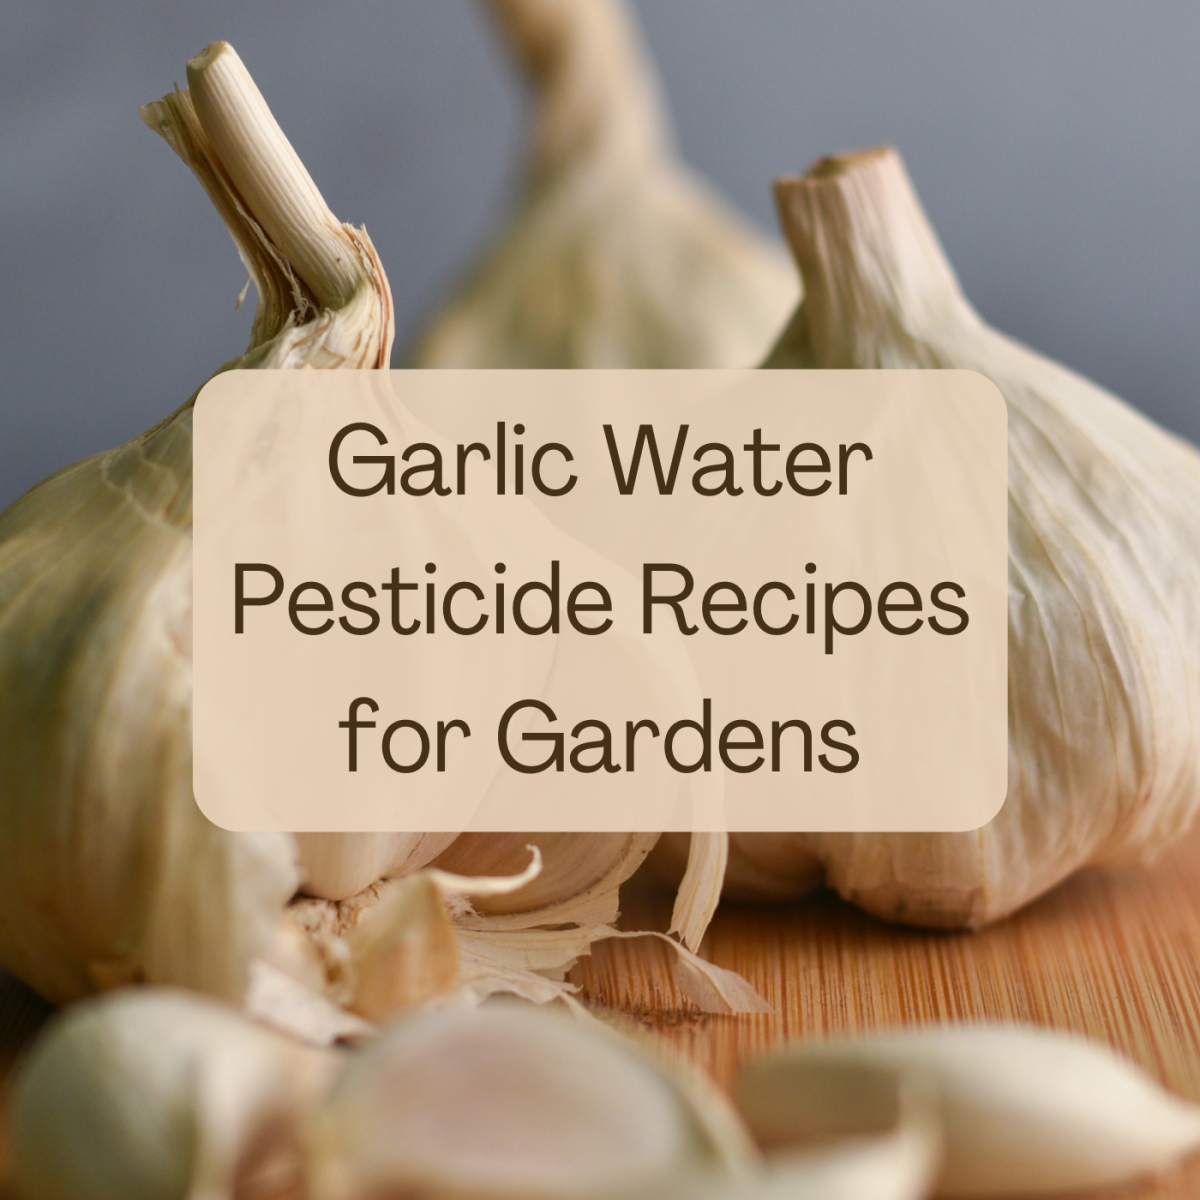 How to Make Garlic Water Pesticide for Plants